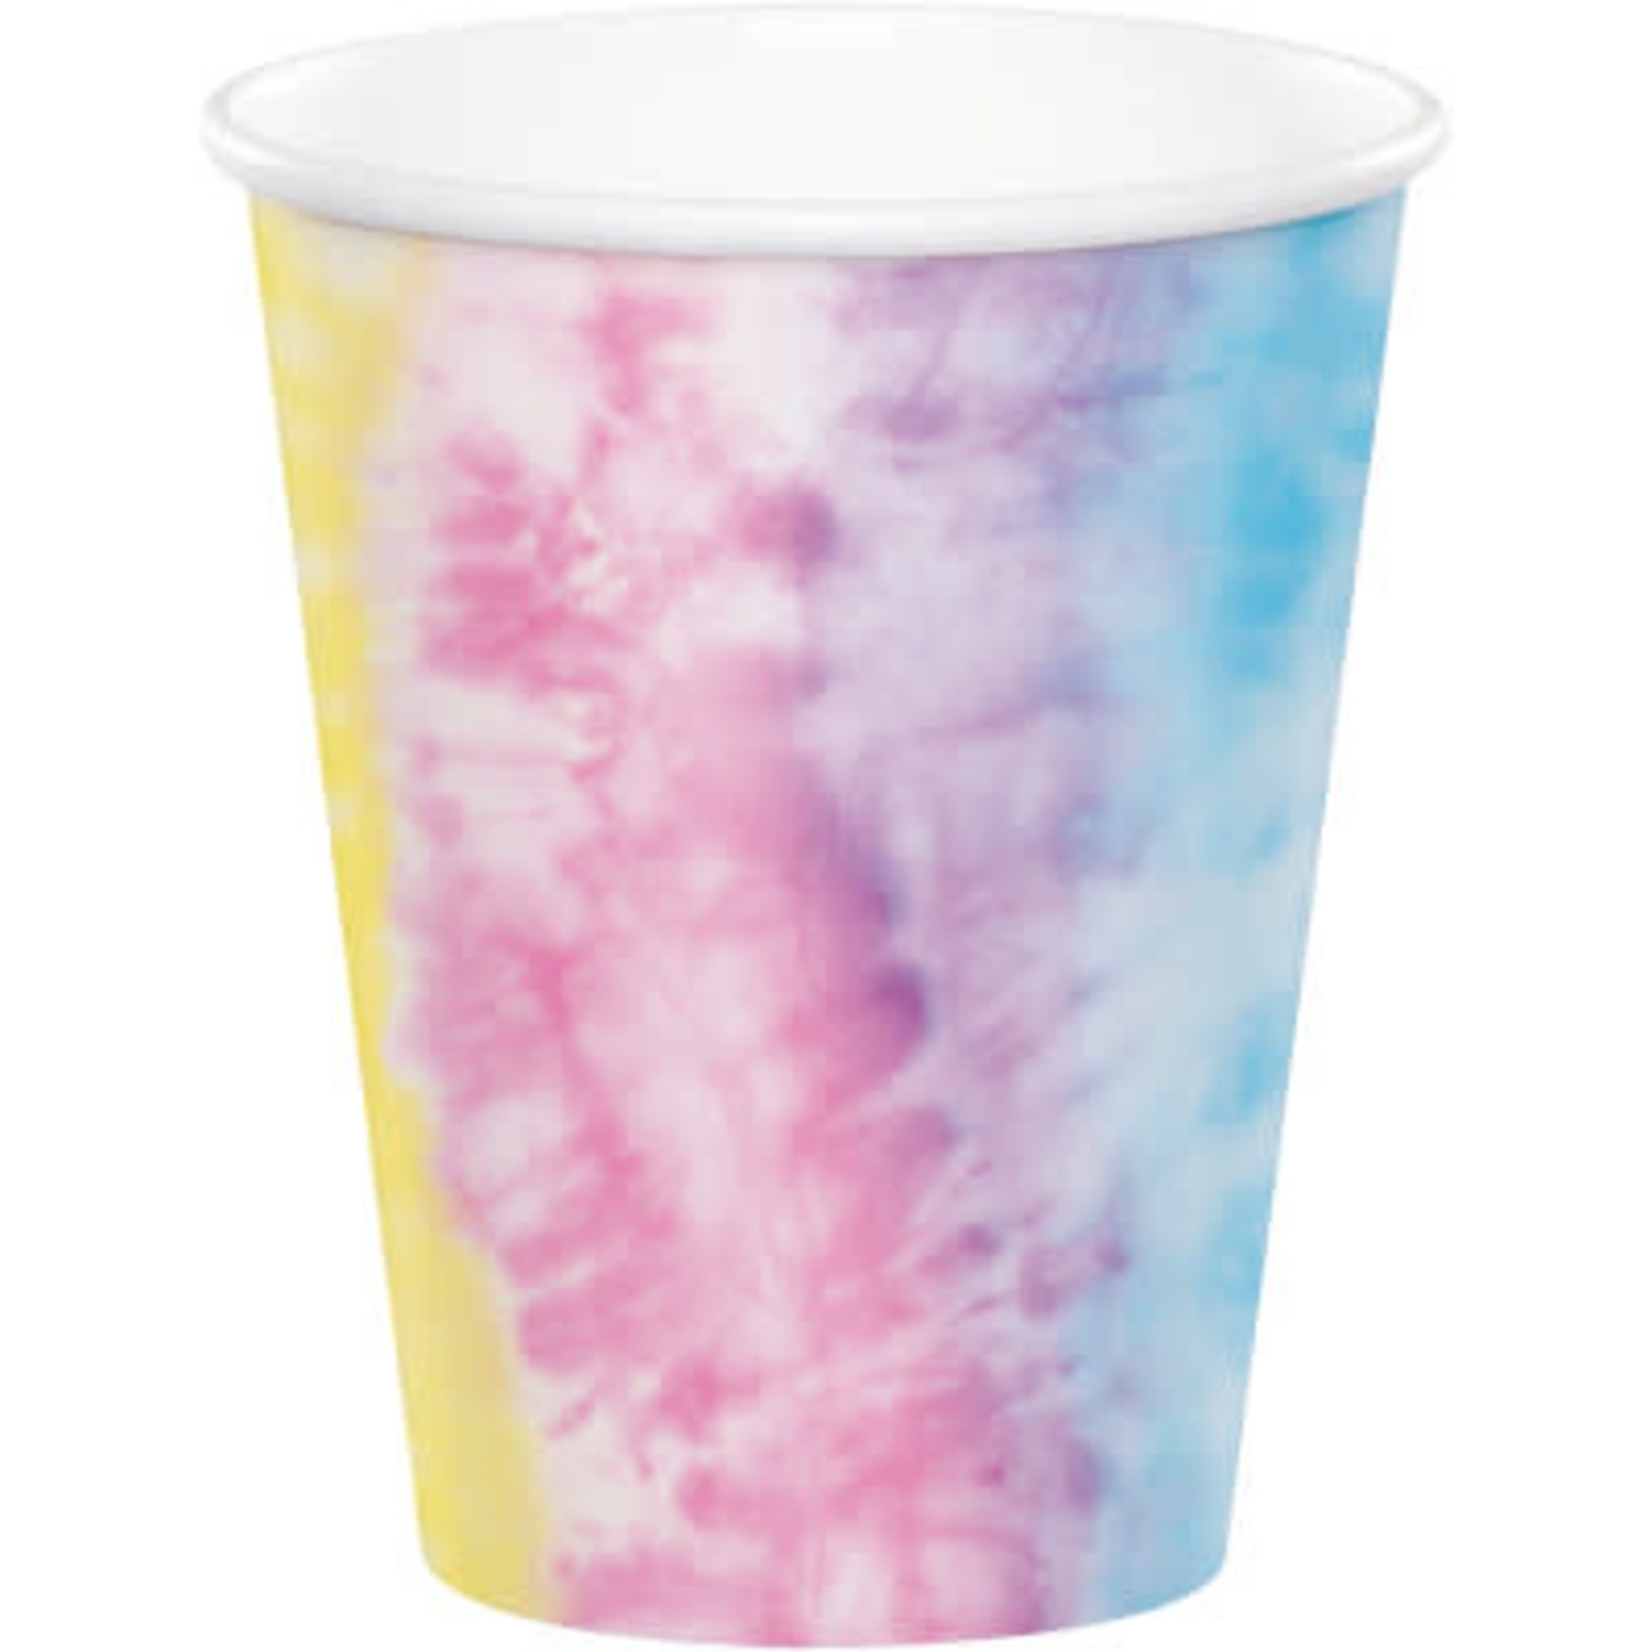 Paper Coffee Cups Collection Decorated In Patriotic Design With